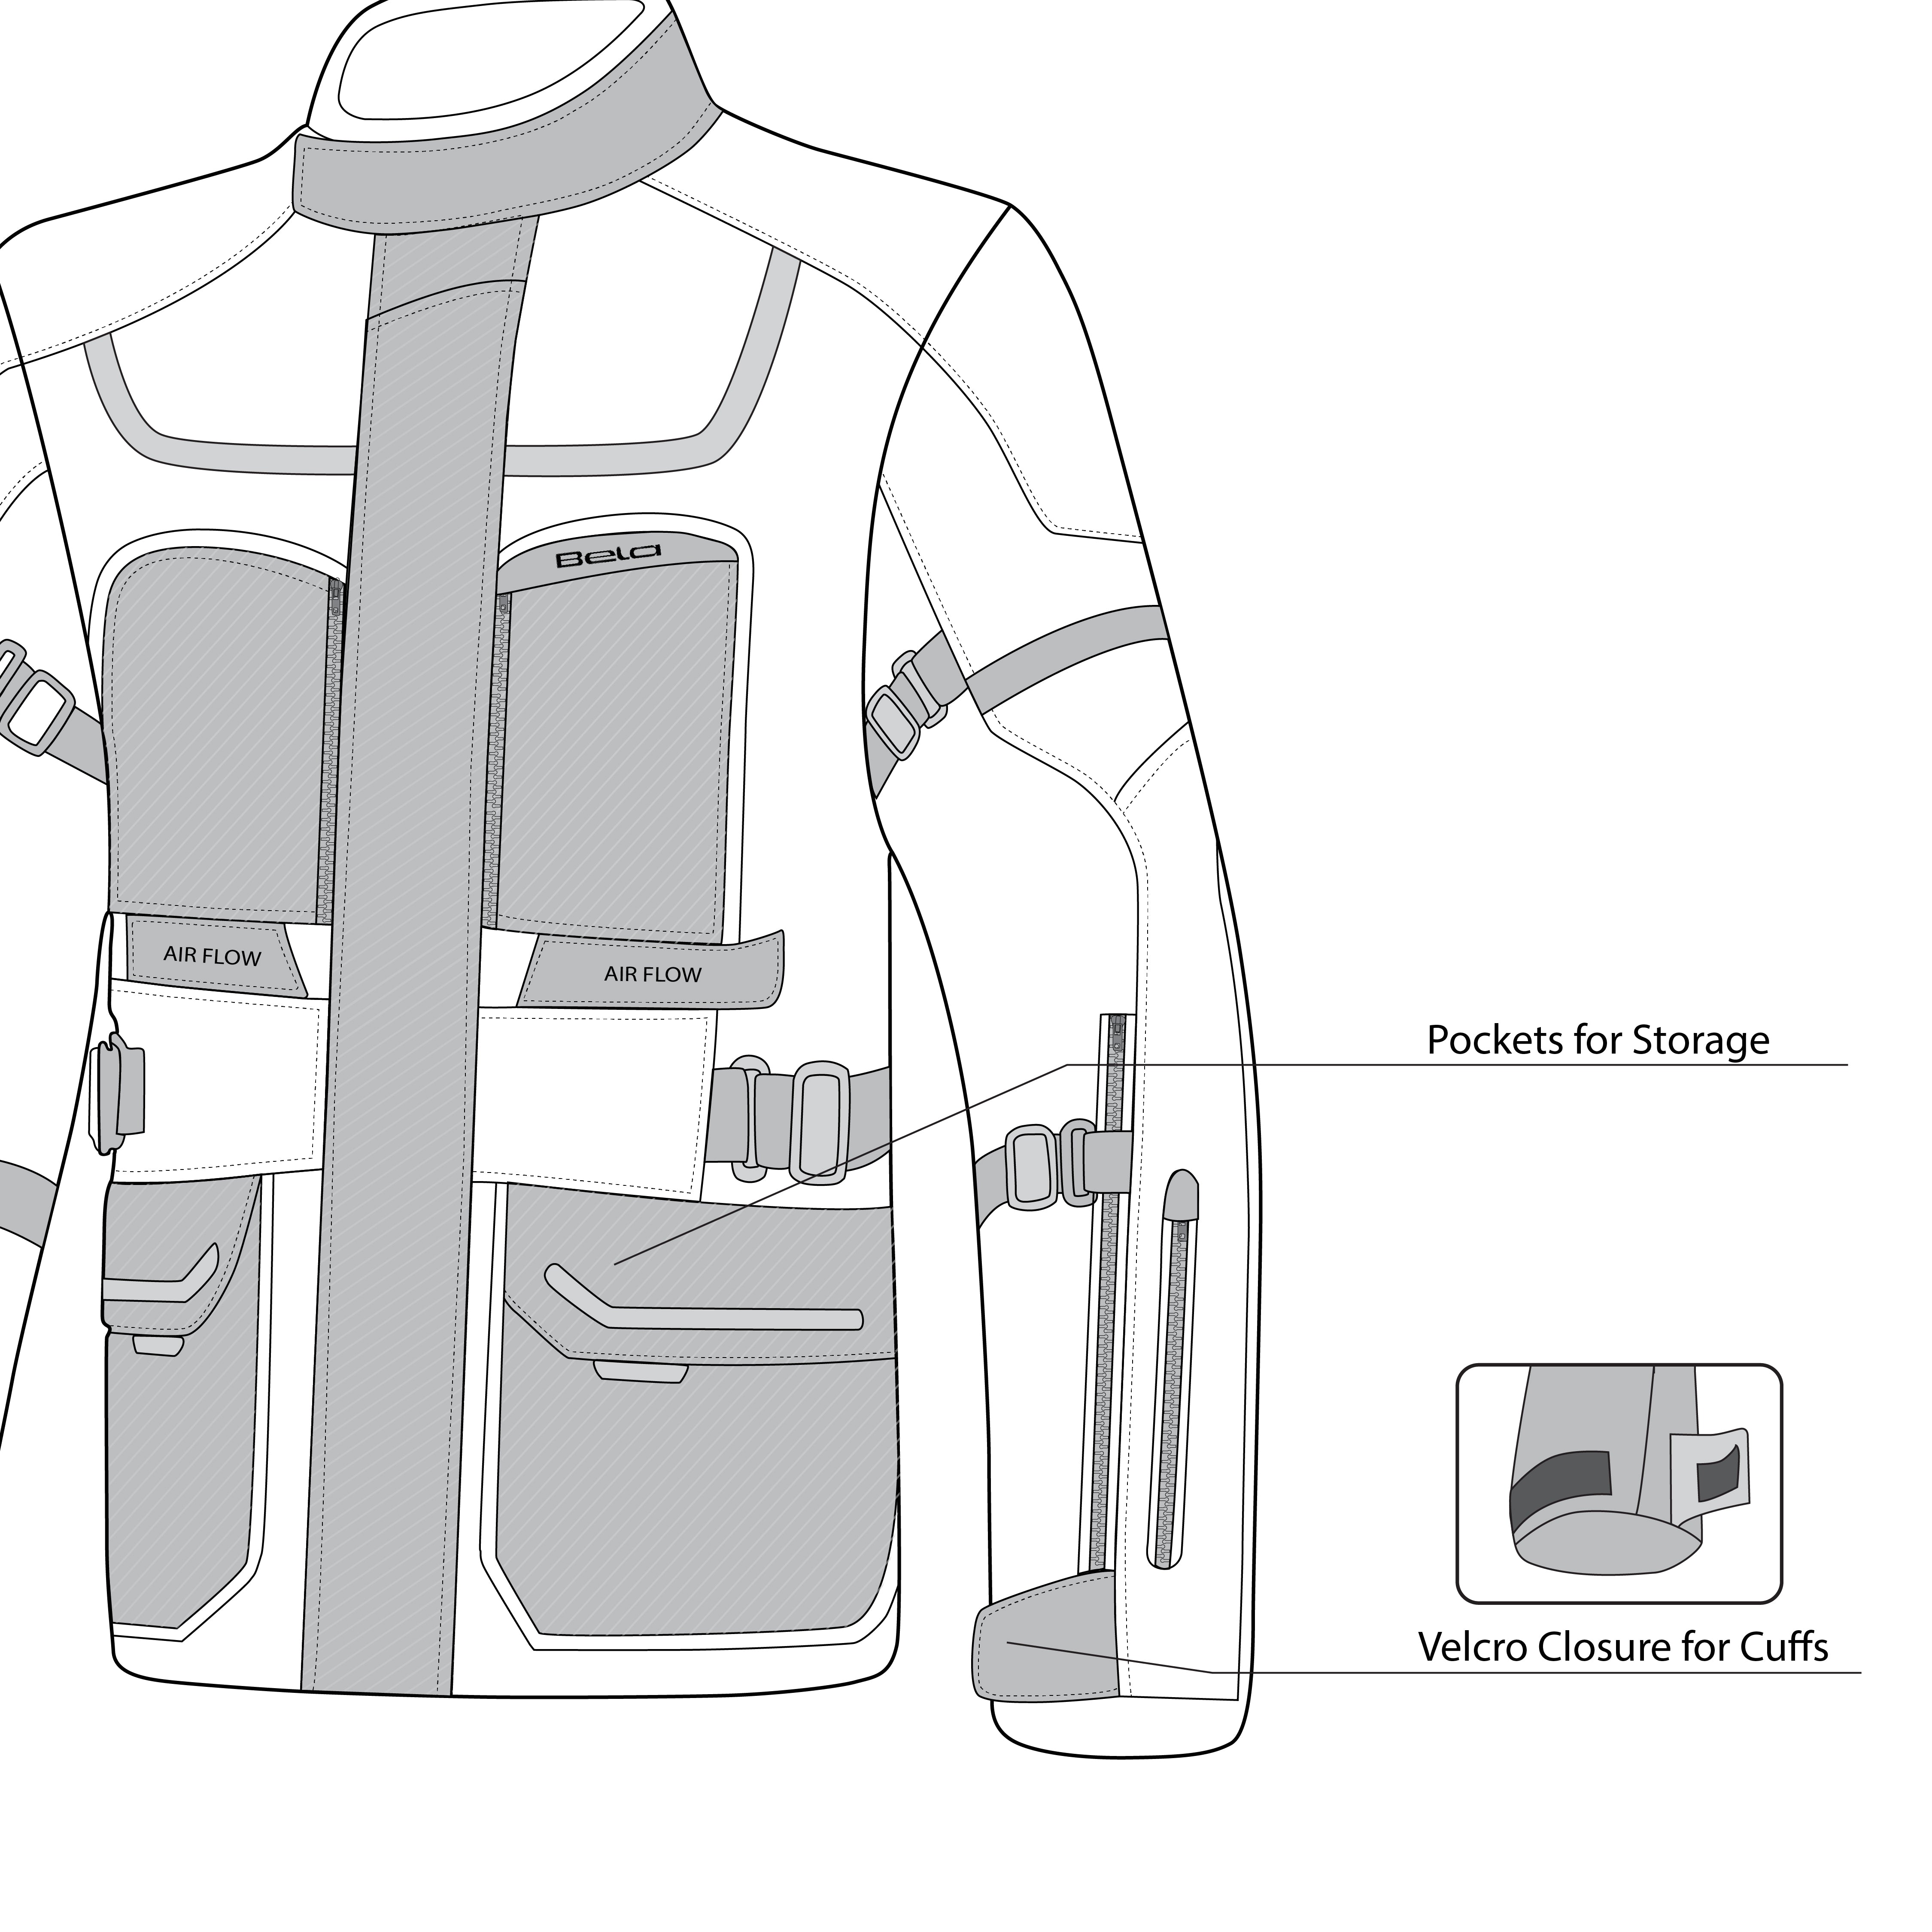 infographic sketch bela transformer the winter jacket black and yellow-flouro front bottom side view